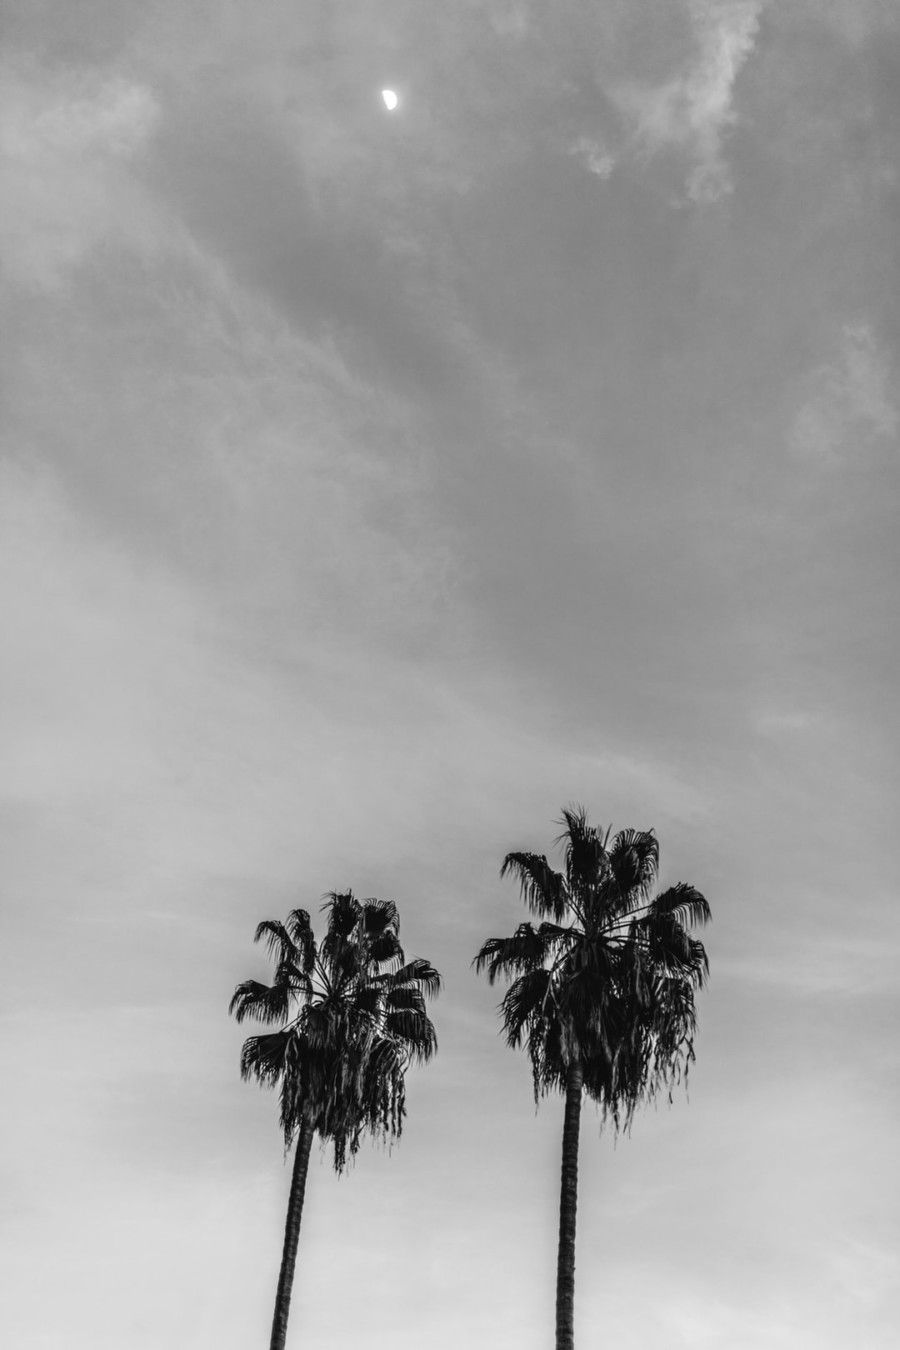 grayscale-photography-of-two-coconut-trees-under-cloudy-sky